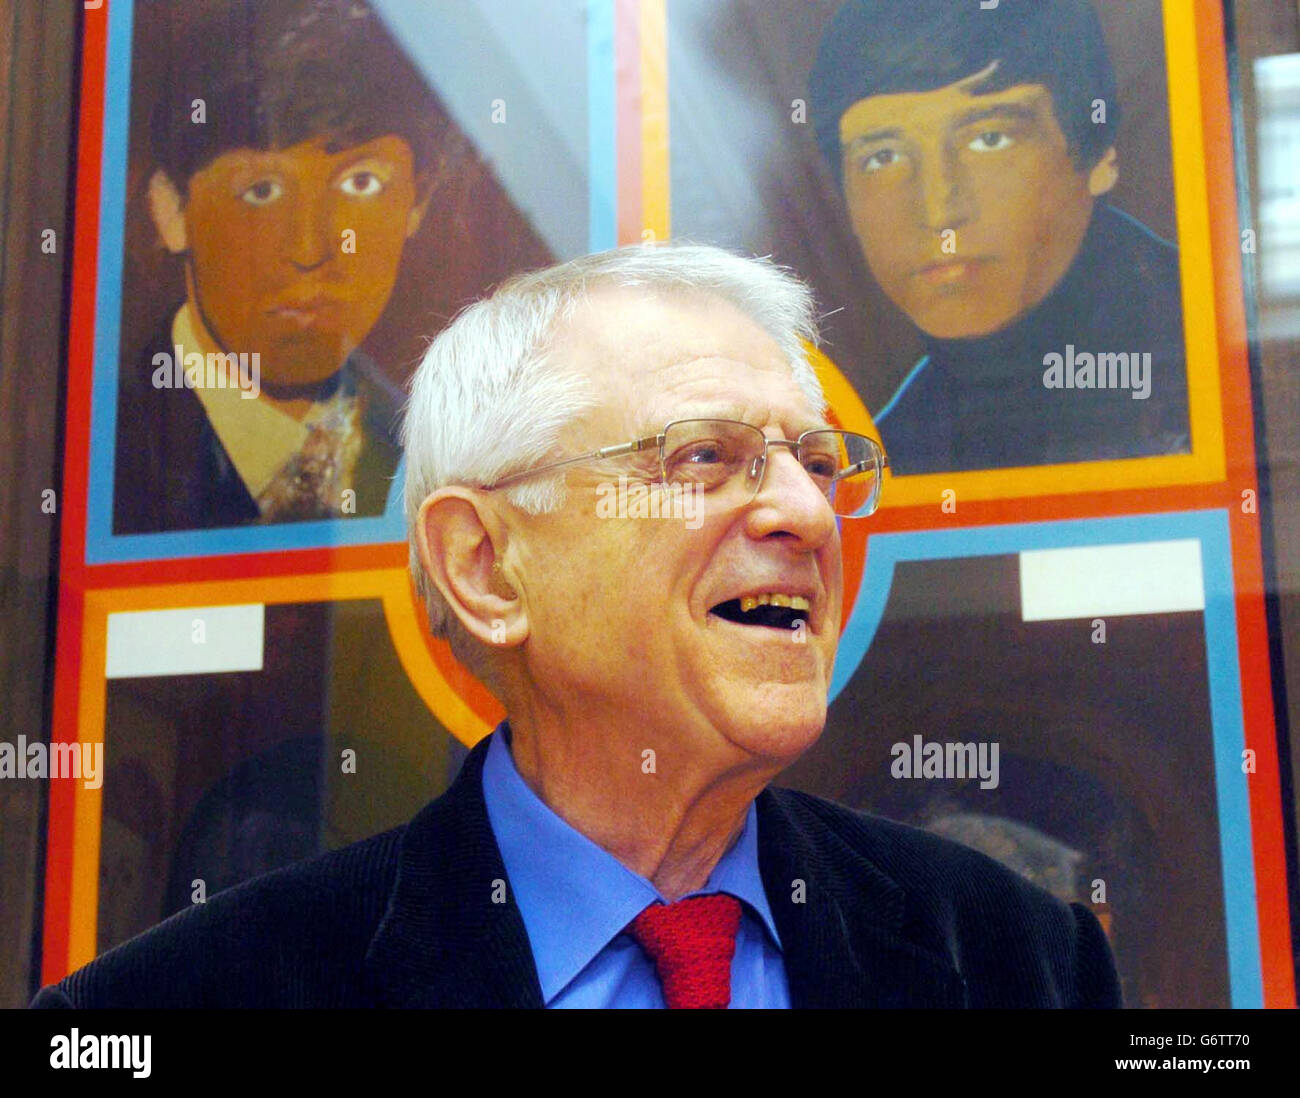 Professor Sir Colin St John Wilson, architect of the British Library, stands in front of Peter Blake's 'The 1962 Beatles' as he discusses a few of the 600 art works from his own personal collection that he is giving through the National Art Collections Fund to Pallant House Gallery in Chichester, at a press launch in west London. The collection assembled consists of leading modern and contemporary artists working in the UK over the last century including Lucian Freud, Frank Auerbach, Peter Blake and Patrick Caulfield. Stock Photo